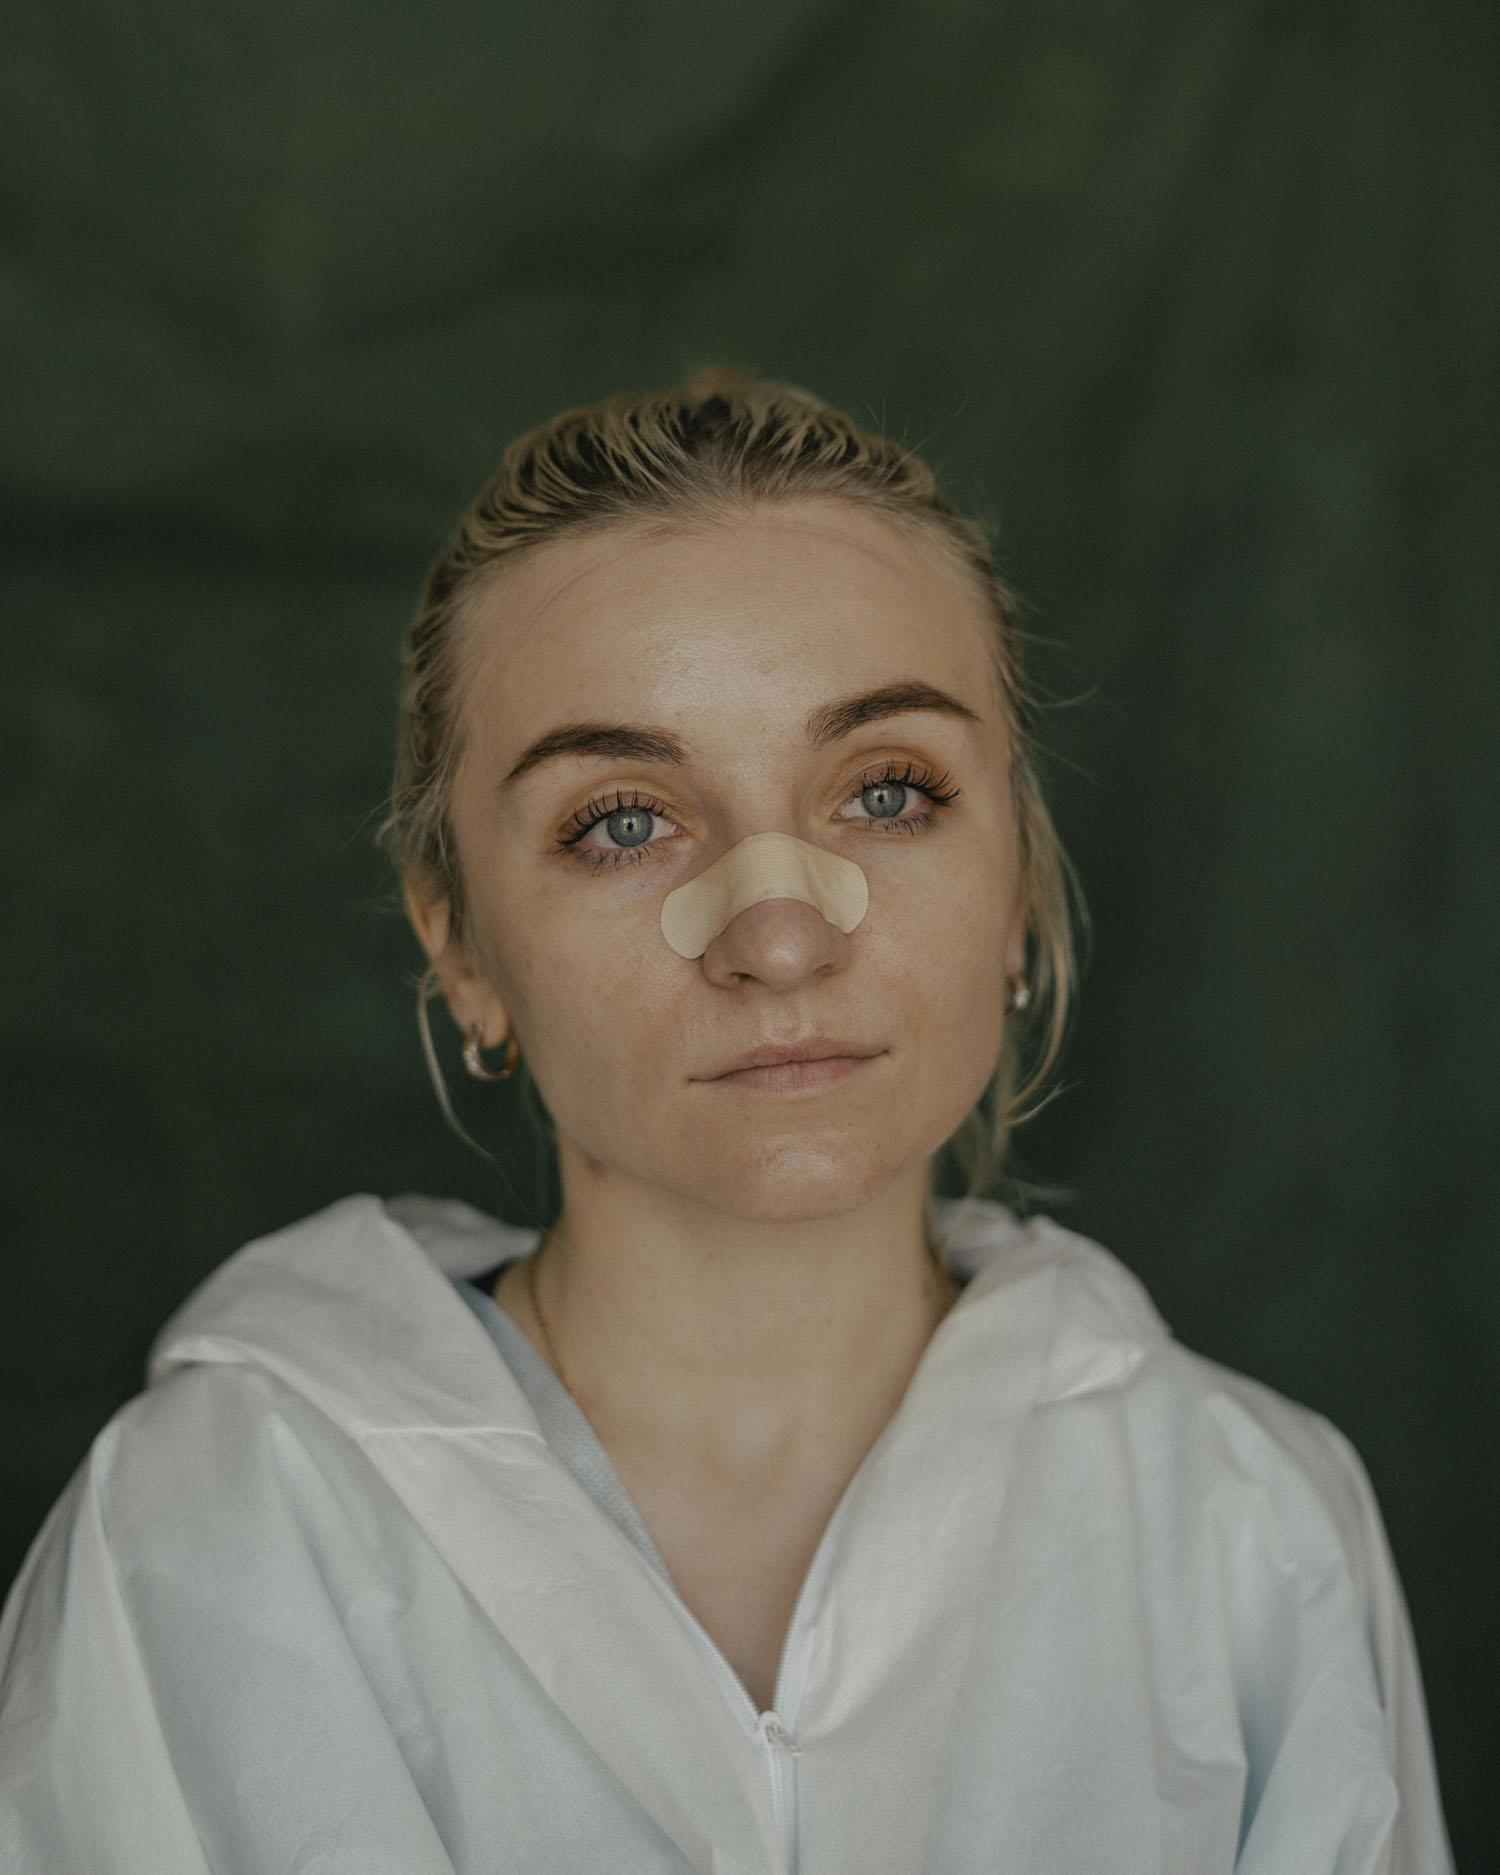 Nurse Margarita Sokolova. From the series Just Stand and Look (2020) by Nanna Heitmann. Moscow (2020)